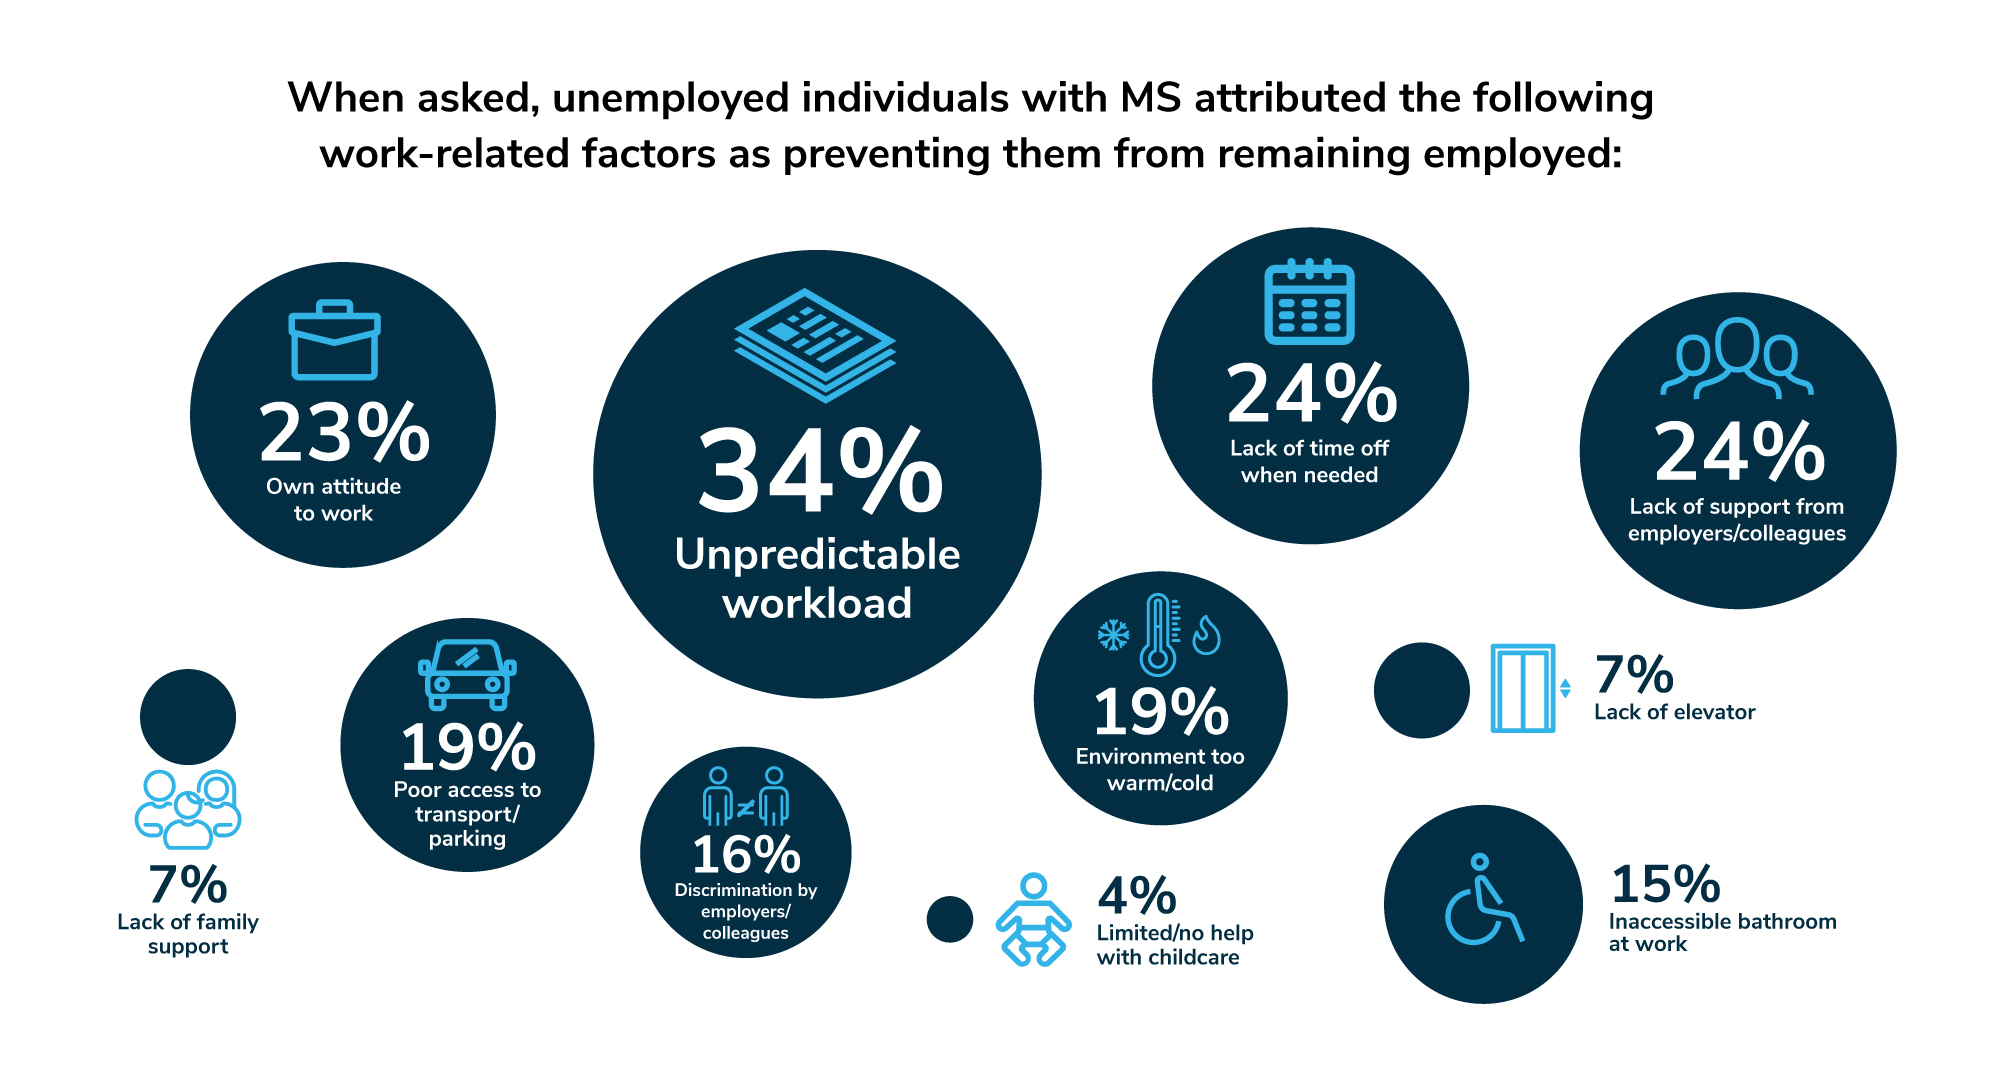 External factors that prevented people with MS from staying in employment. Unpredictable workload (34%) Lack of time off when needed (24%) Lack of support from employer/colleagues (24%) Own attitude to work (23%) Environment too warm / cold (19%)Poor access to transport / parking (19%) Discrimination by employer/colleagues (16%) Inaccesible bathroom at work (15%) Lack of elevator (7%) Lack of family support (7%) Limited/no help with childcare (4%)